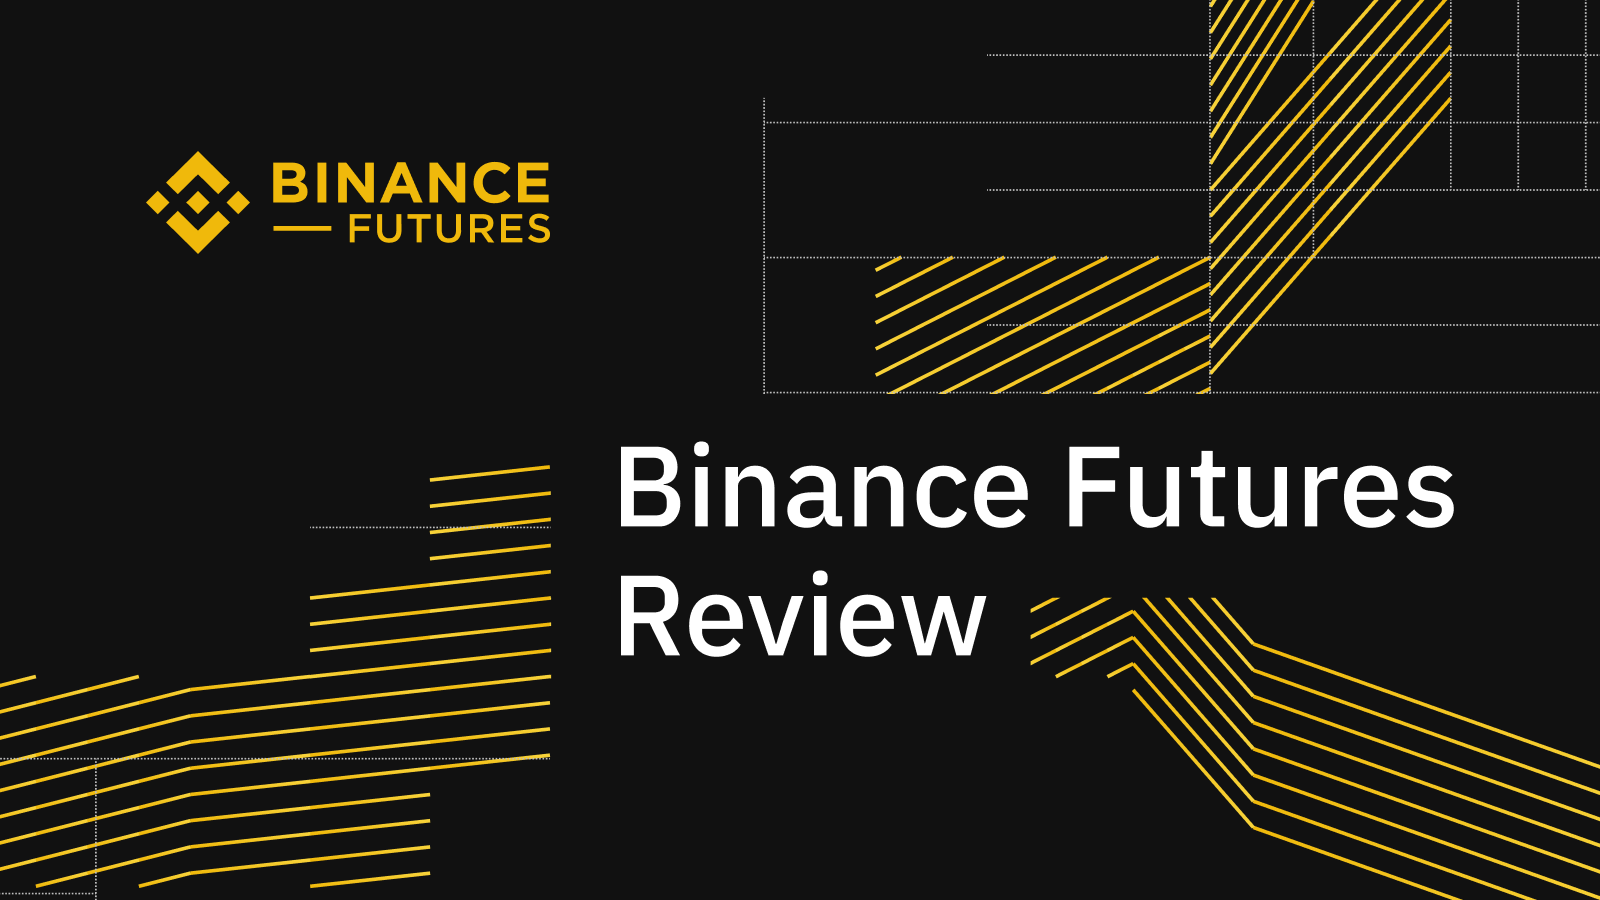 Binance Futures Review, Month 11: We Never Miss a Season